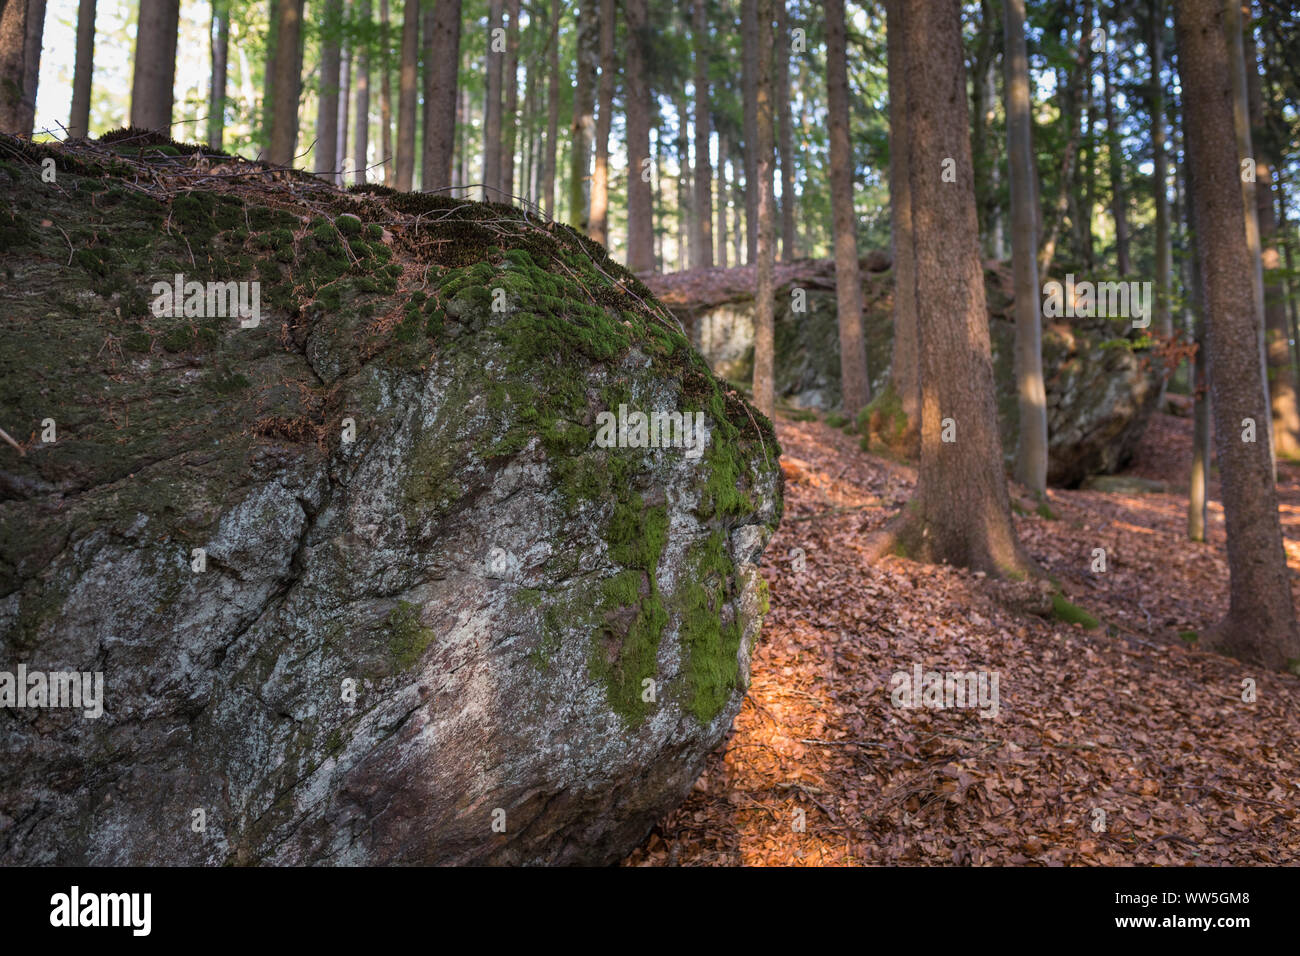 Rock gathering moss in national park forest 'Bayerischer Wald', Bavaria, Germany Stock Photo